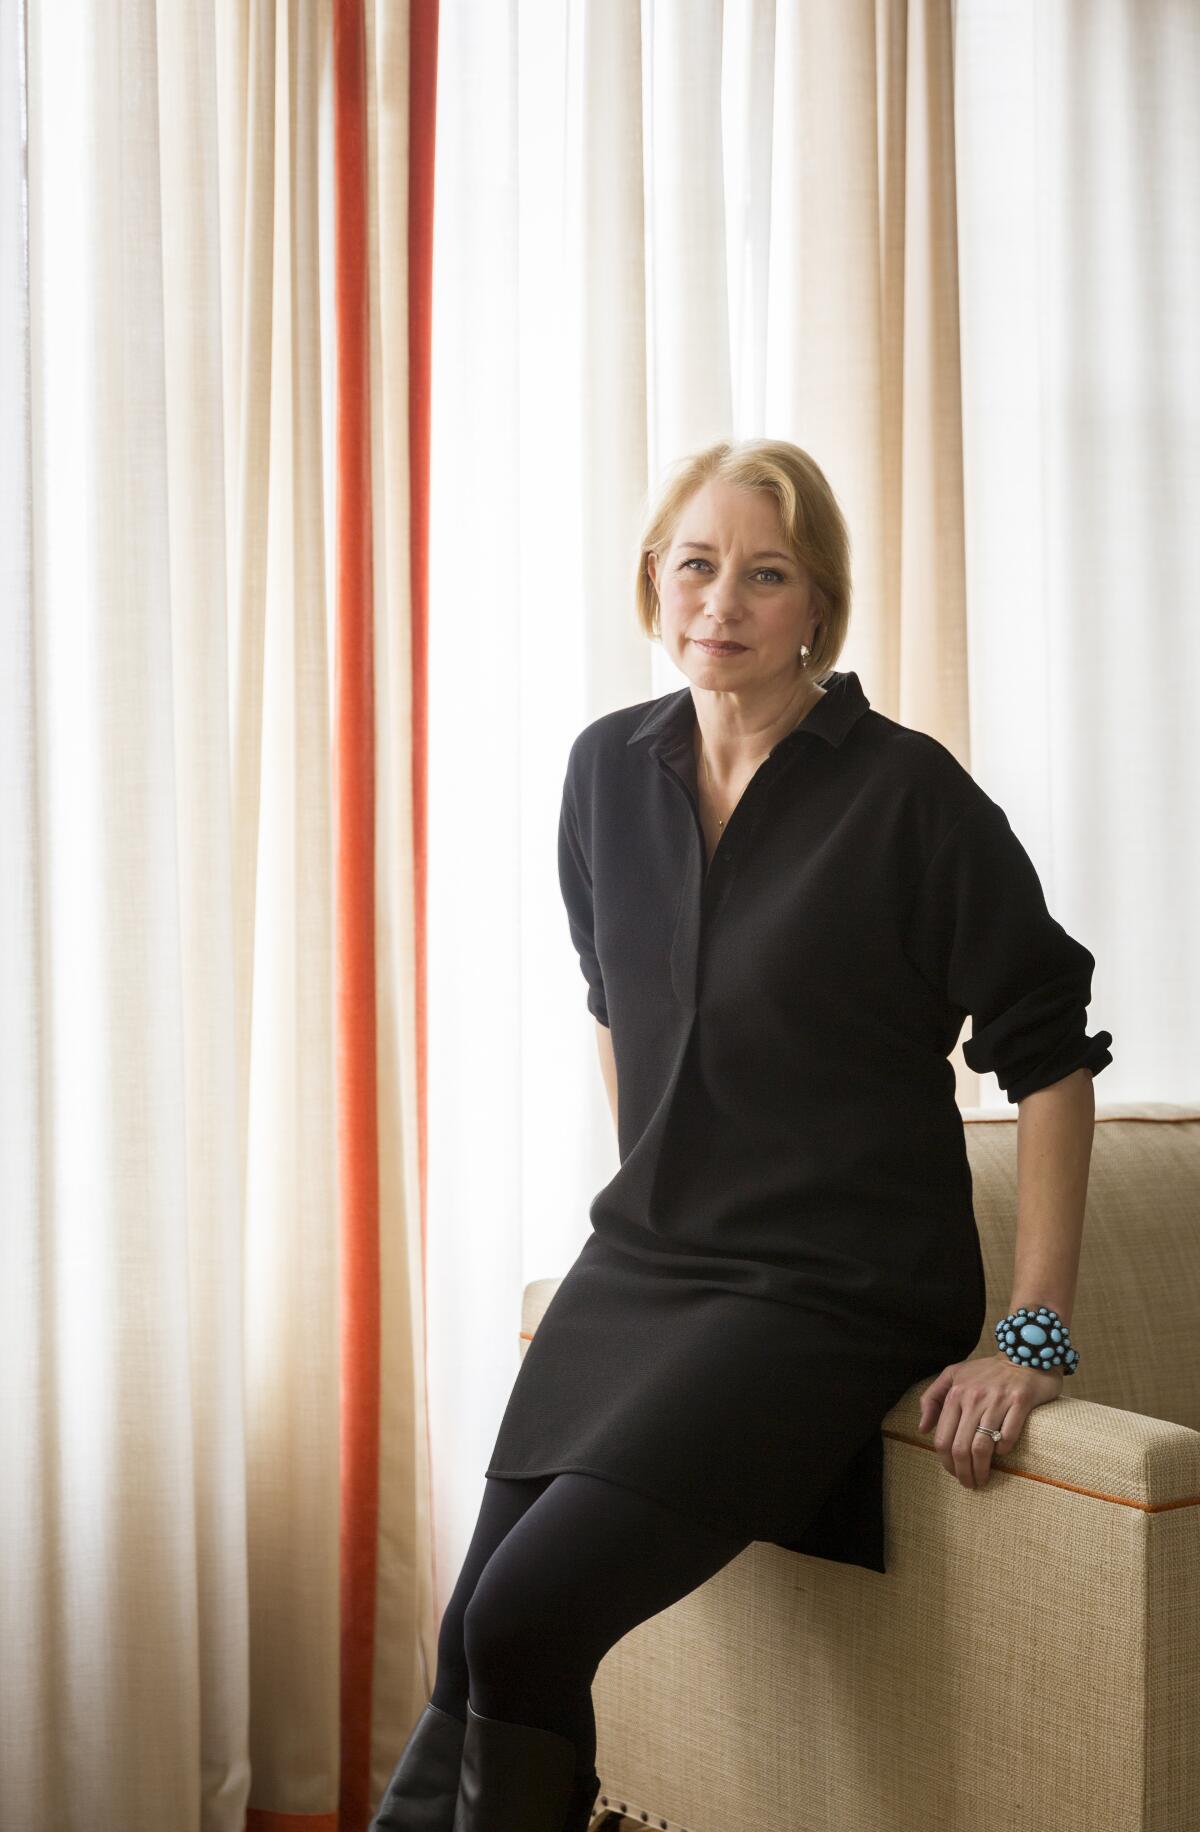 Novelist Laura Lippman has published a new essay collection, "My Life as a Villainess."